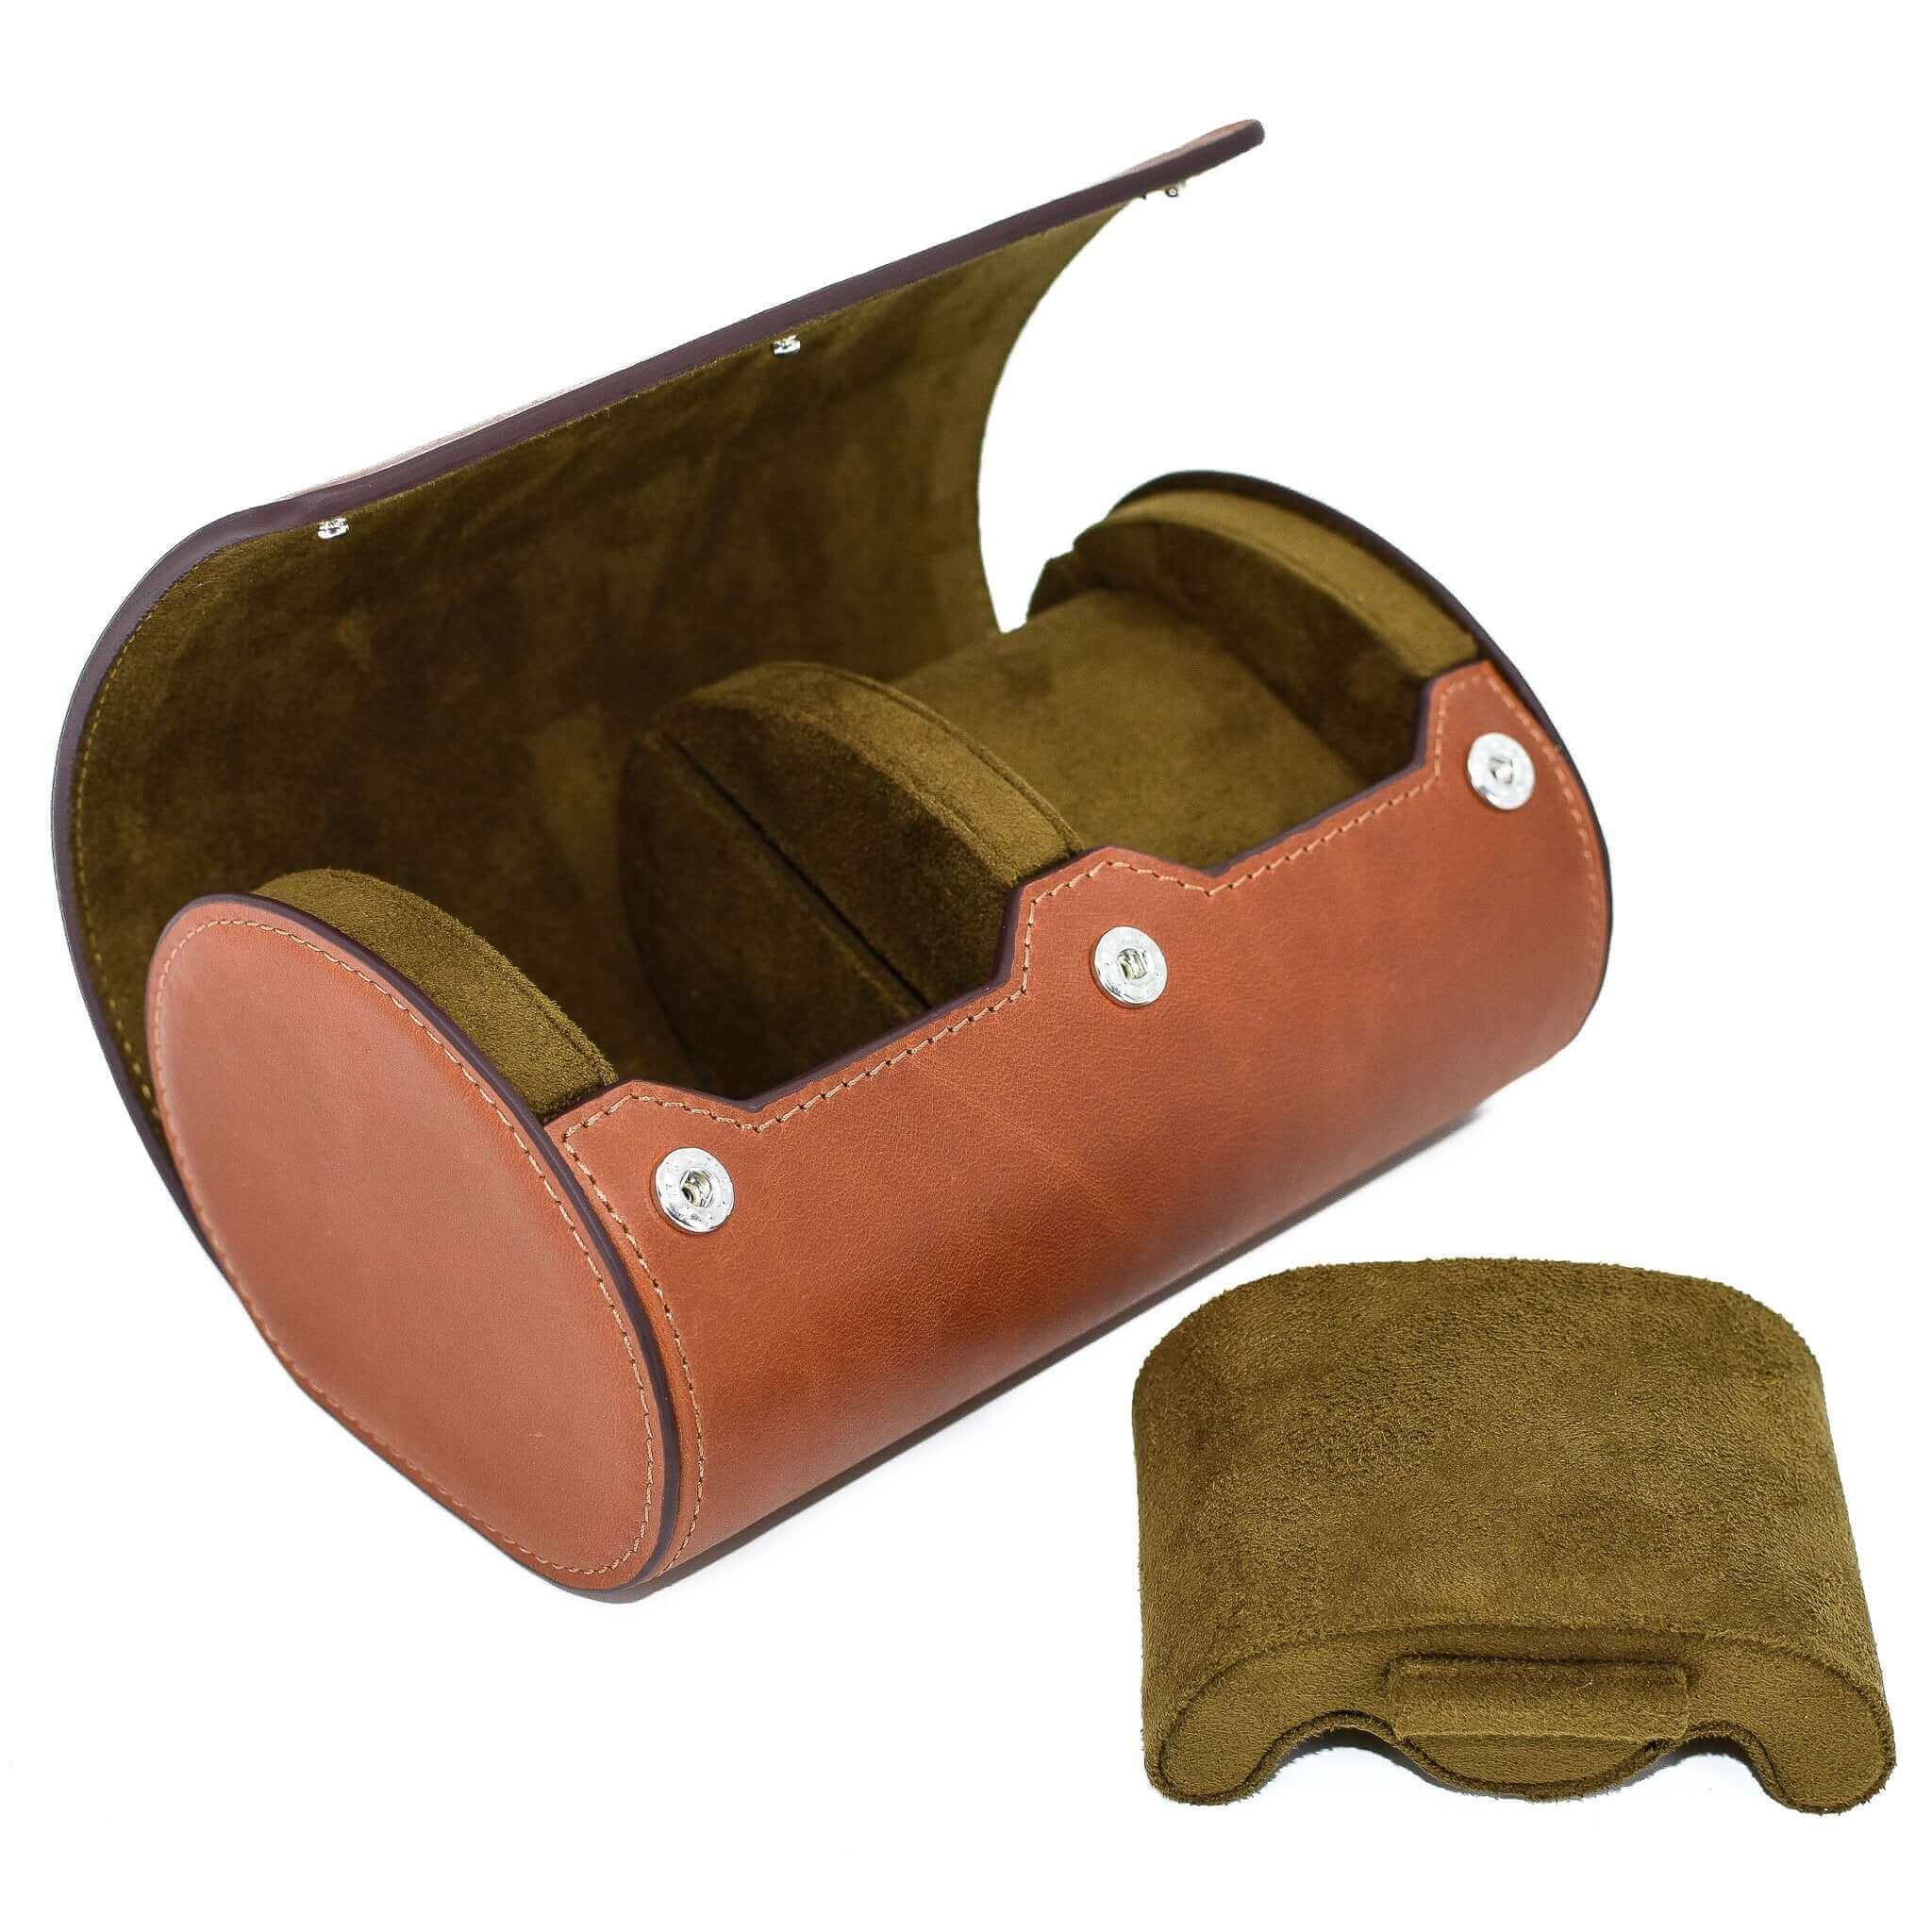 A side view showing the compressible watch pillow removed from Luxury Watch Roll's double slot, vintage brown leather watch roll for two watch storage.